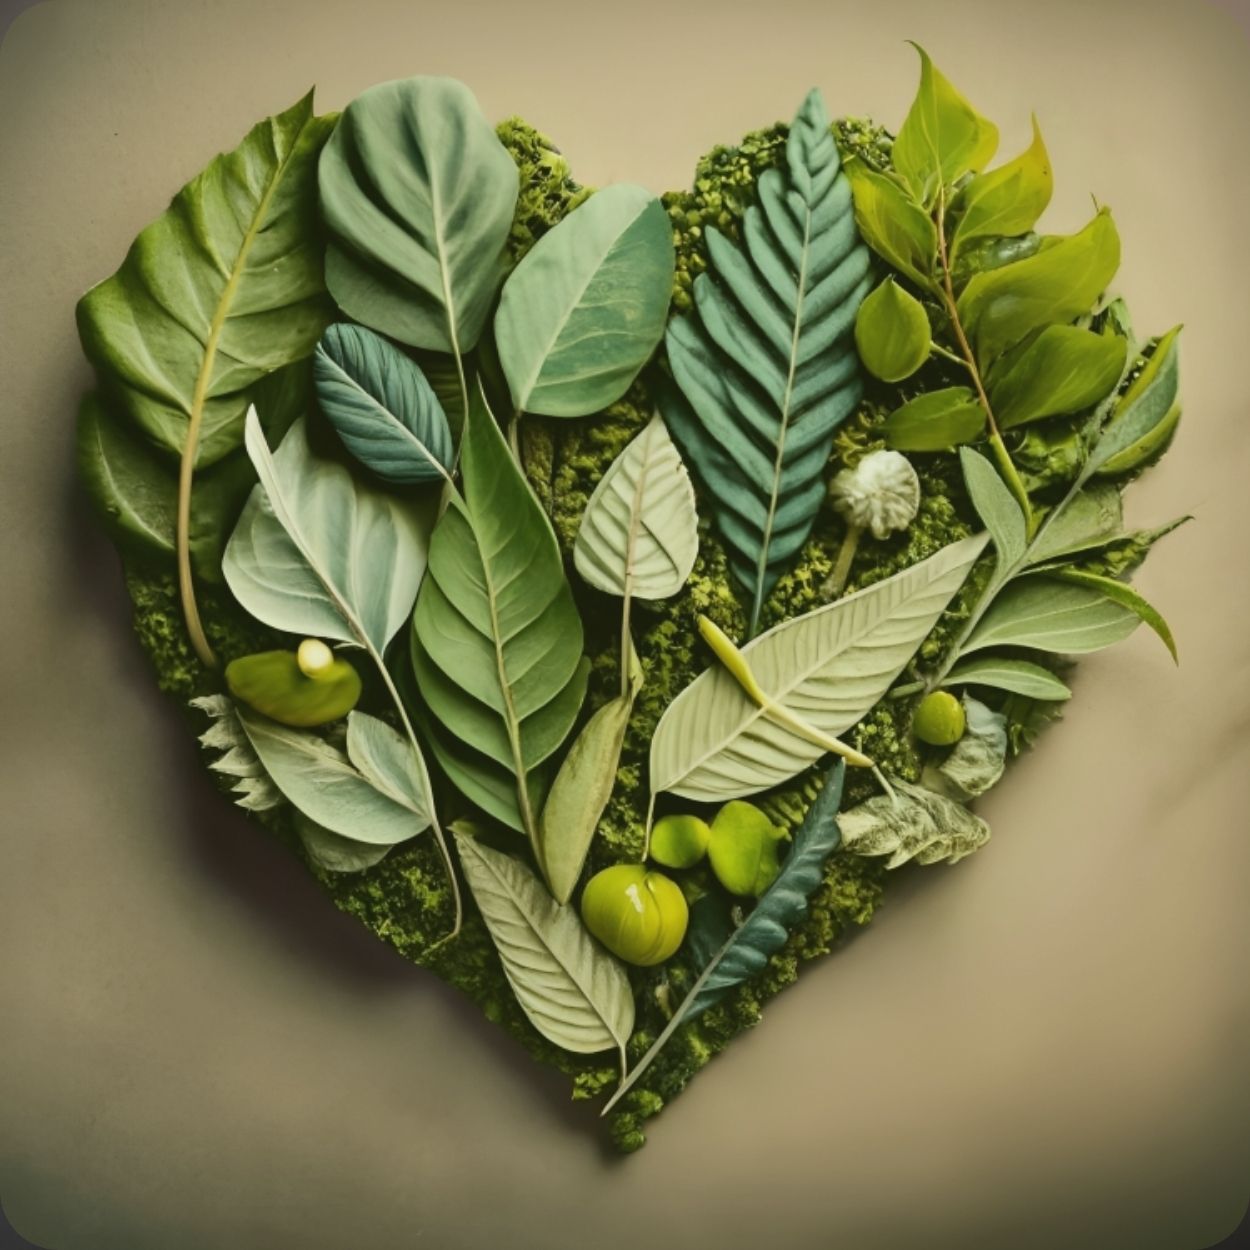 An image of various green herbal leaves arranged together to form a heart shape.